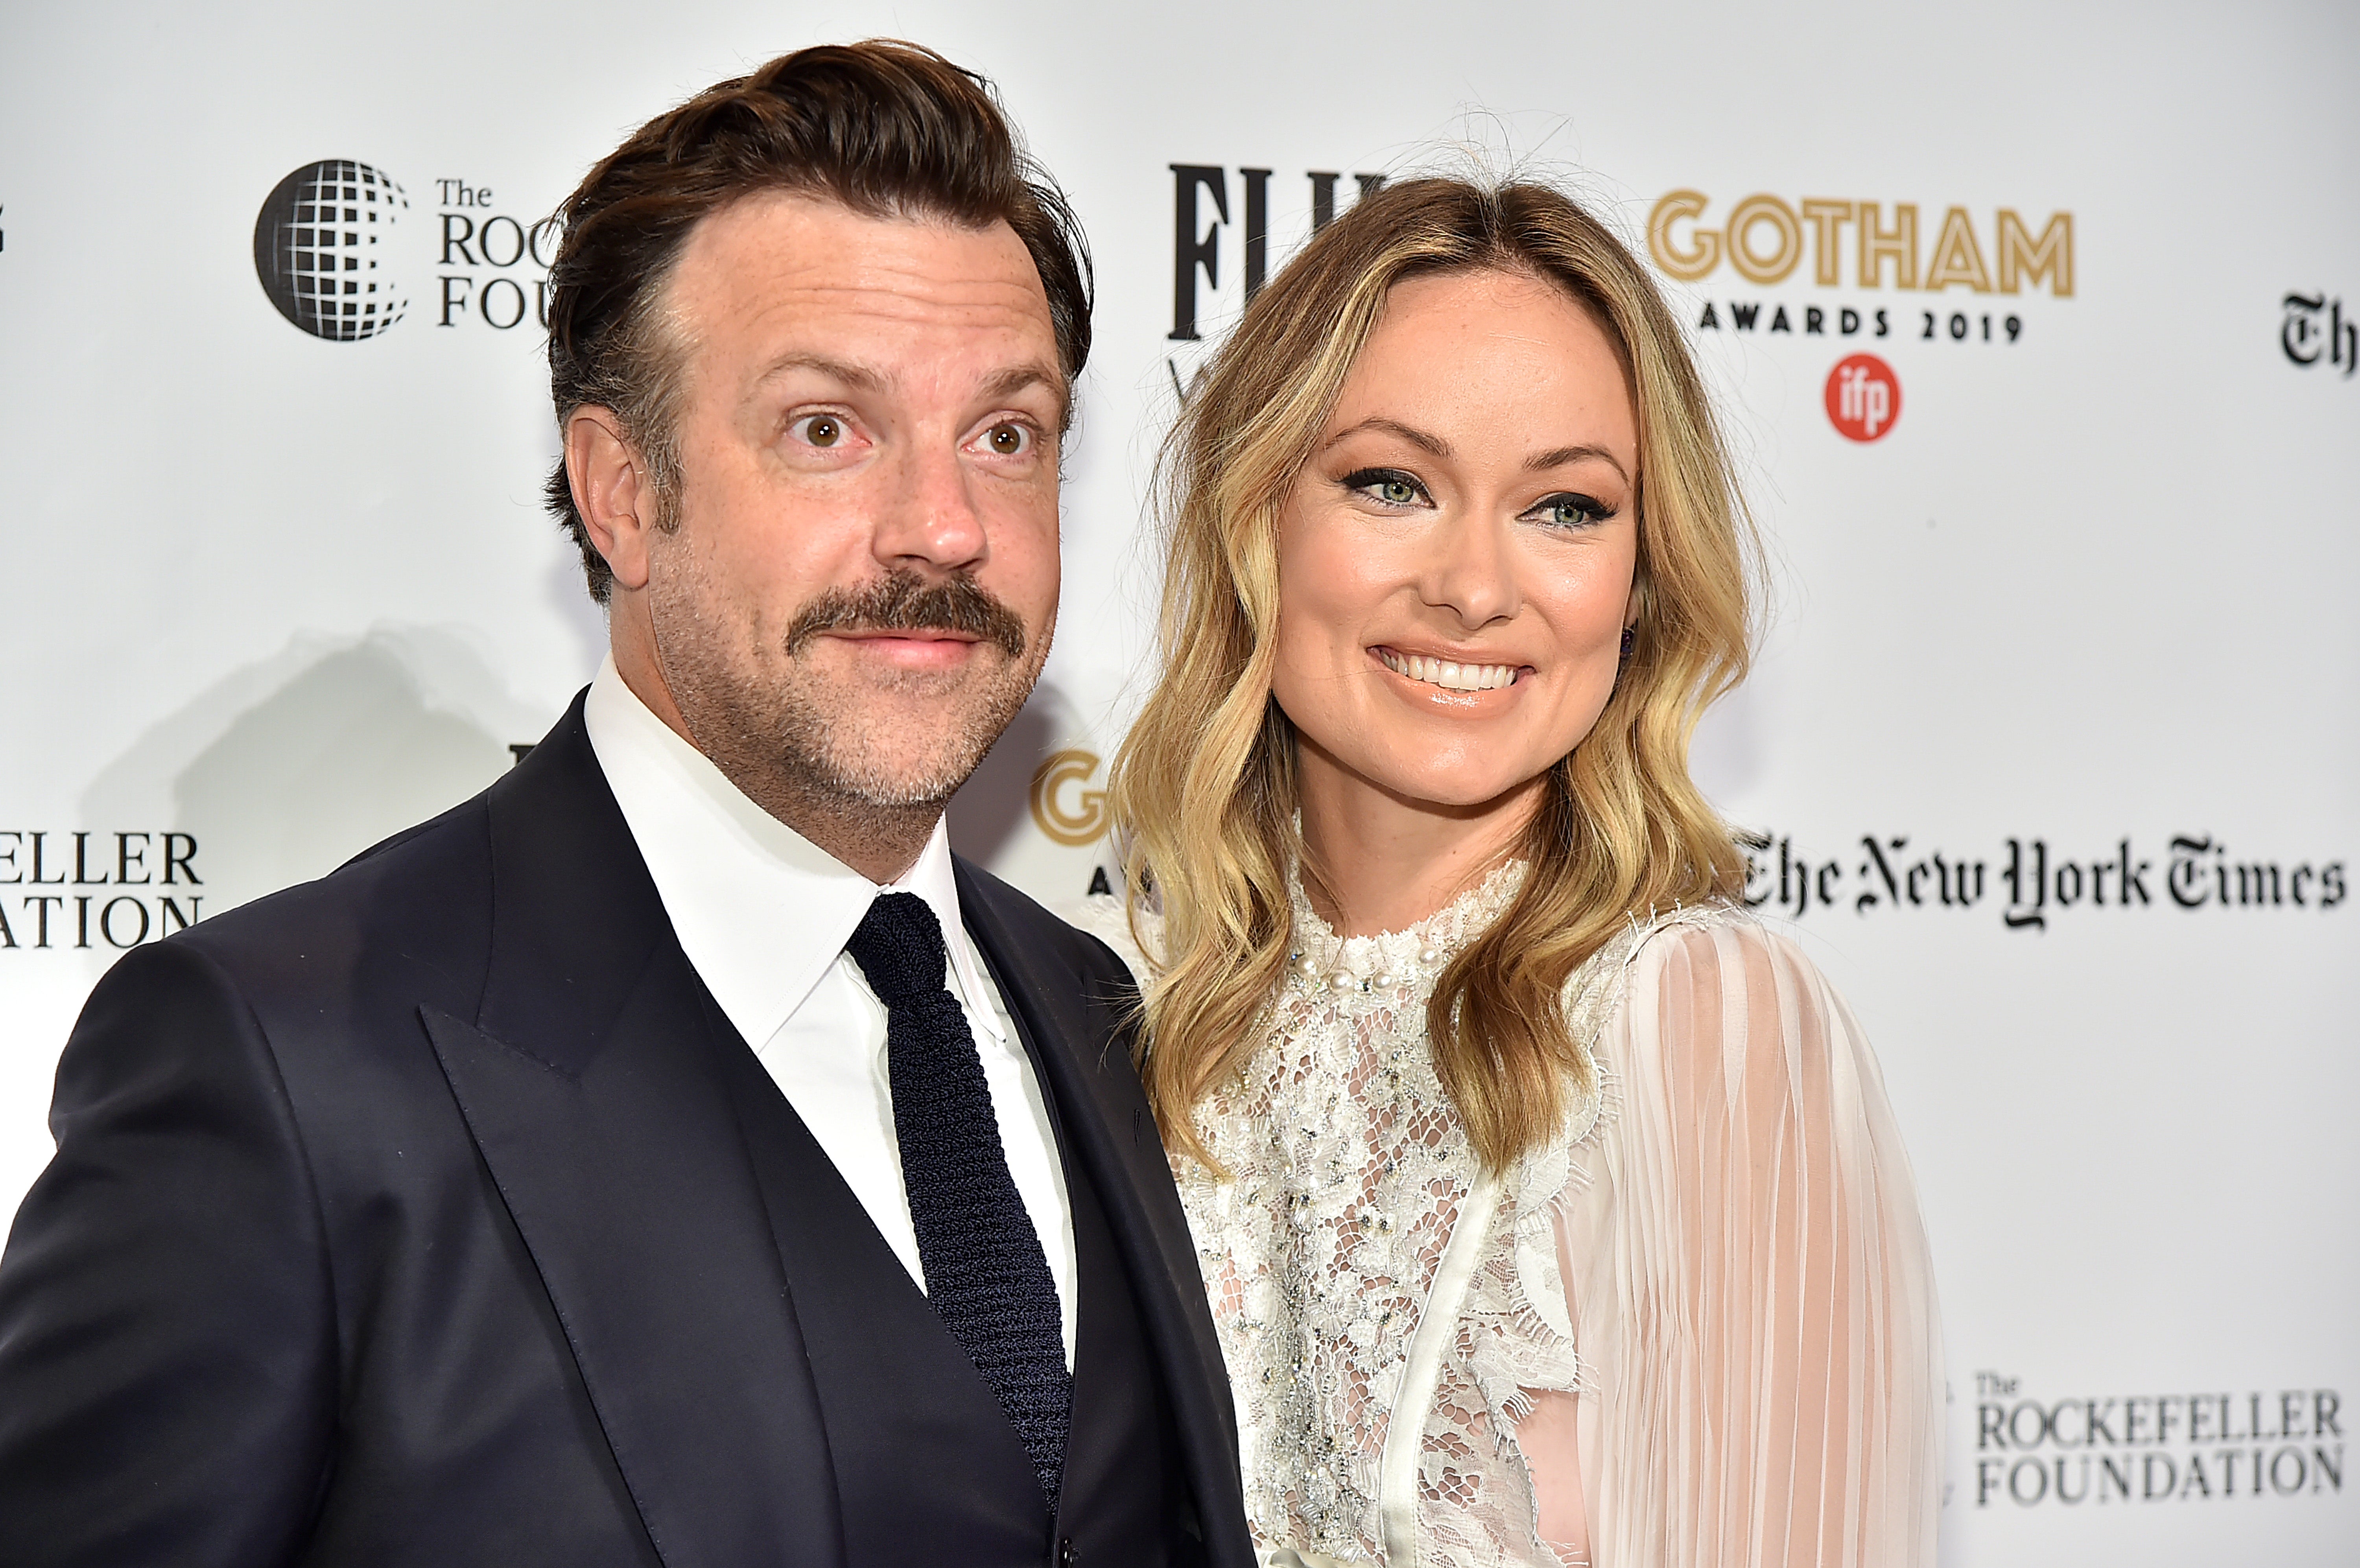 Jason Sudeikis opens up about separation from Olivia Wilde